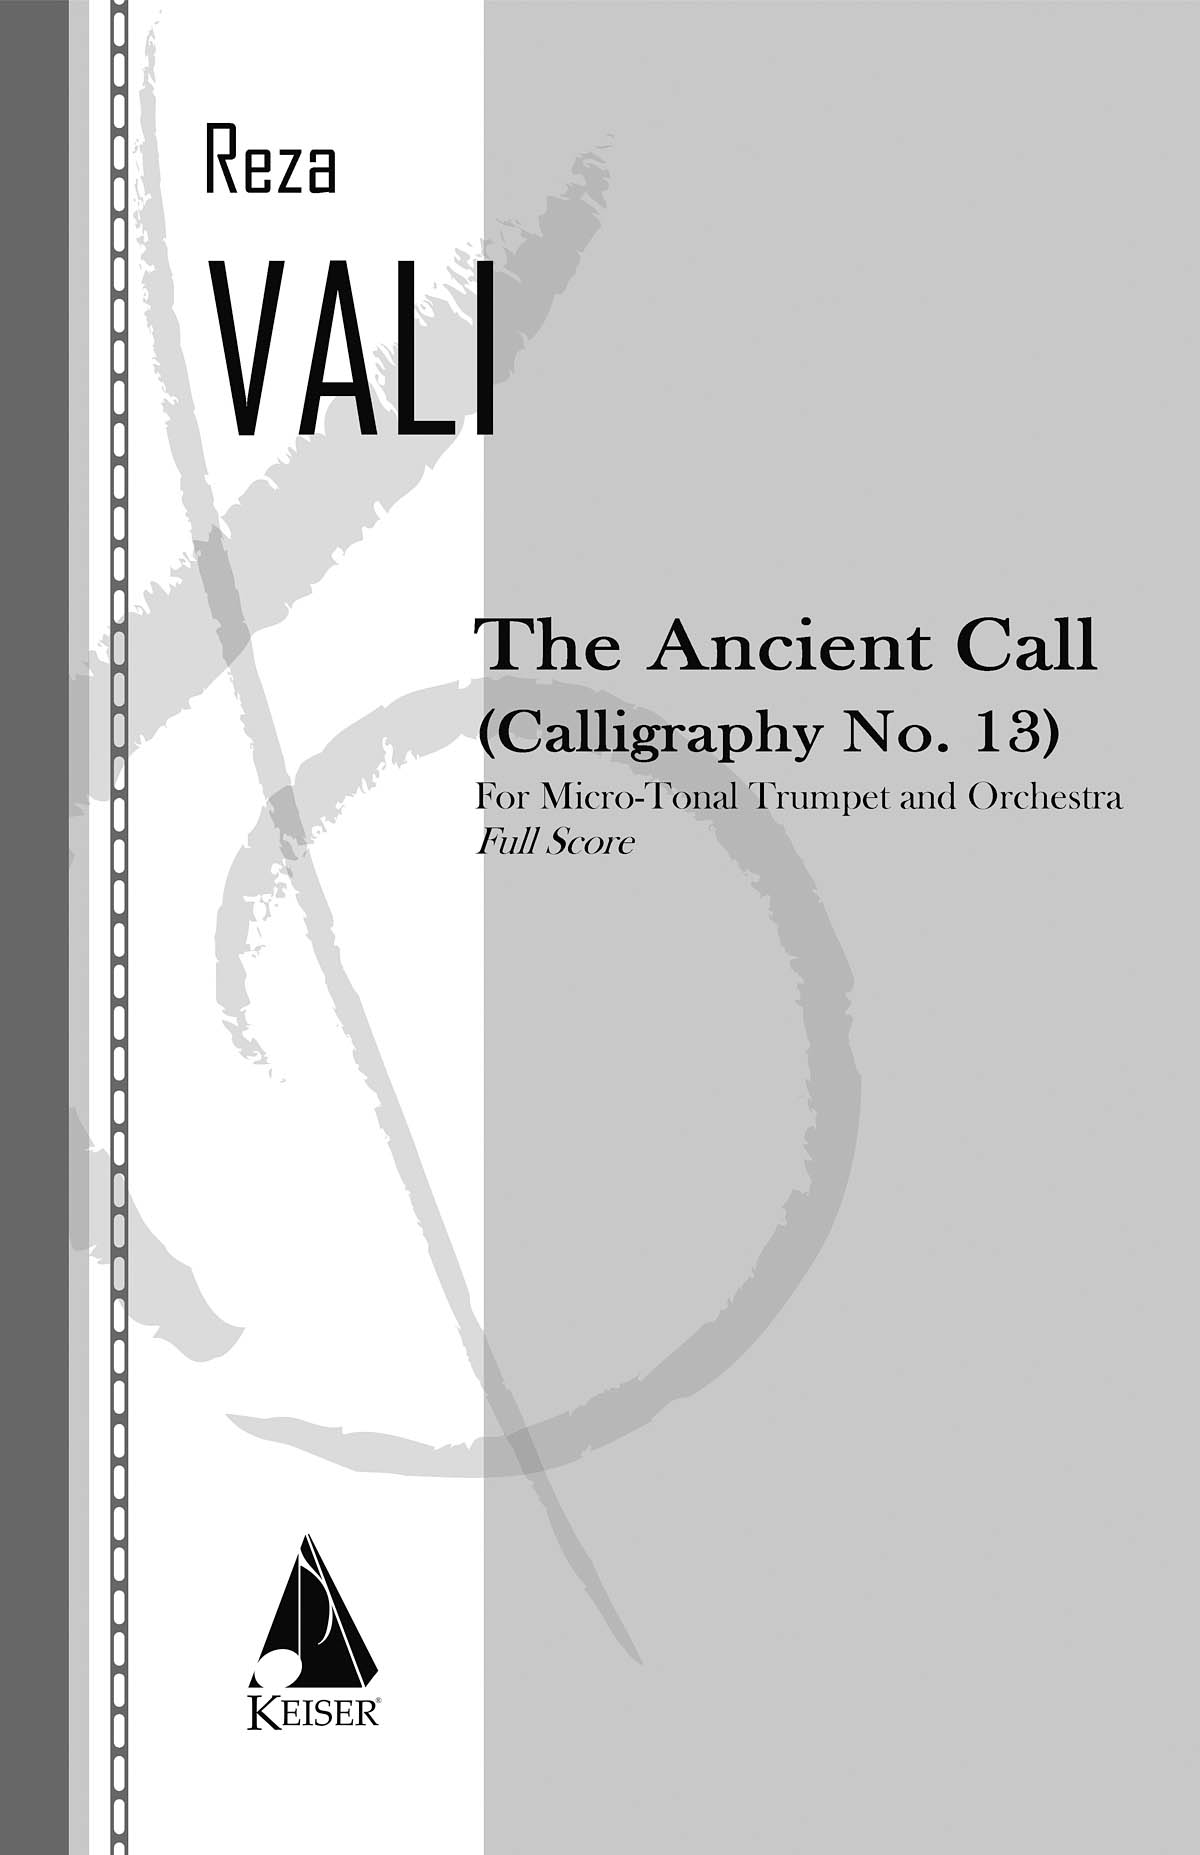 The Ancient Call: Calligraphy No. 13